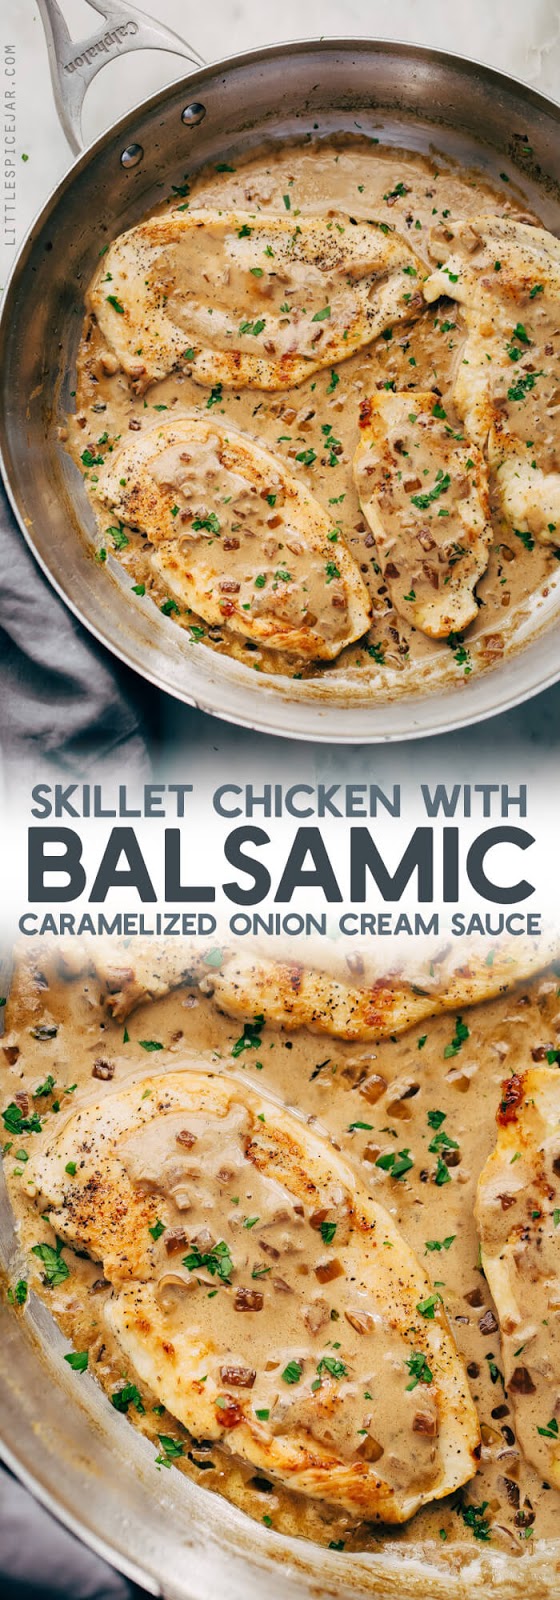 Skillet Chicken In Balsamic Caramelized Onion Cream Sauce - RECIPES